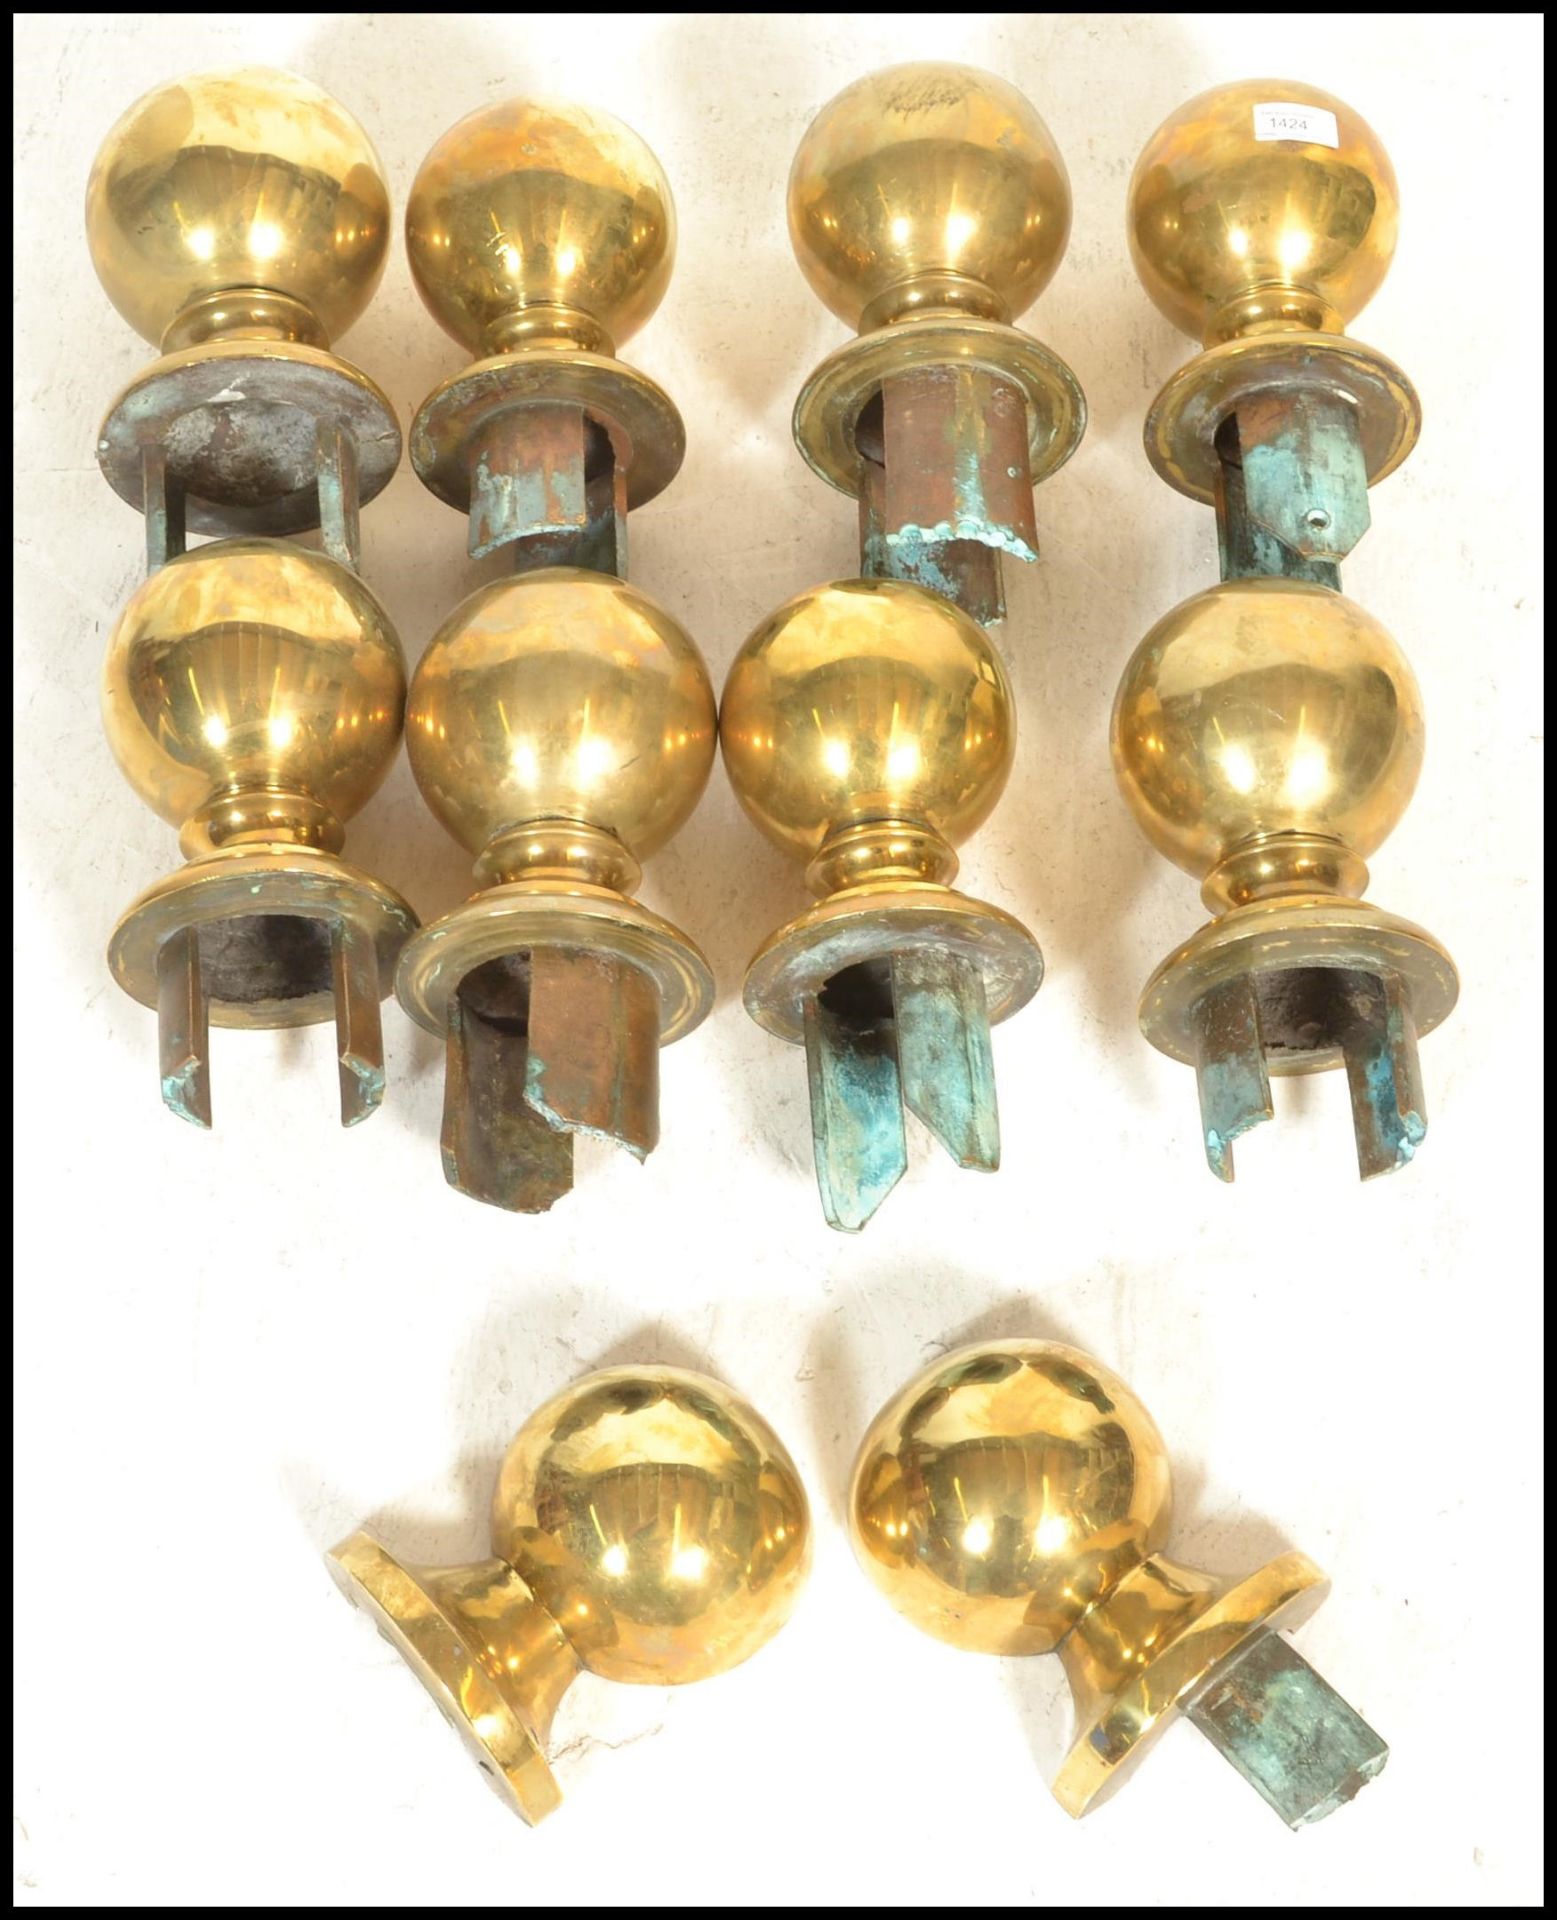 A 19th Century Victorian collection of cast brass balustrade / staircase finials of round orb